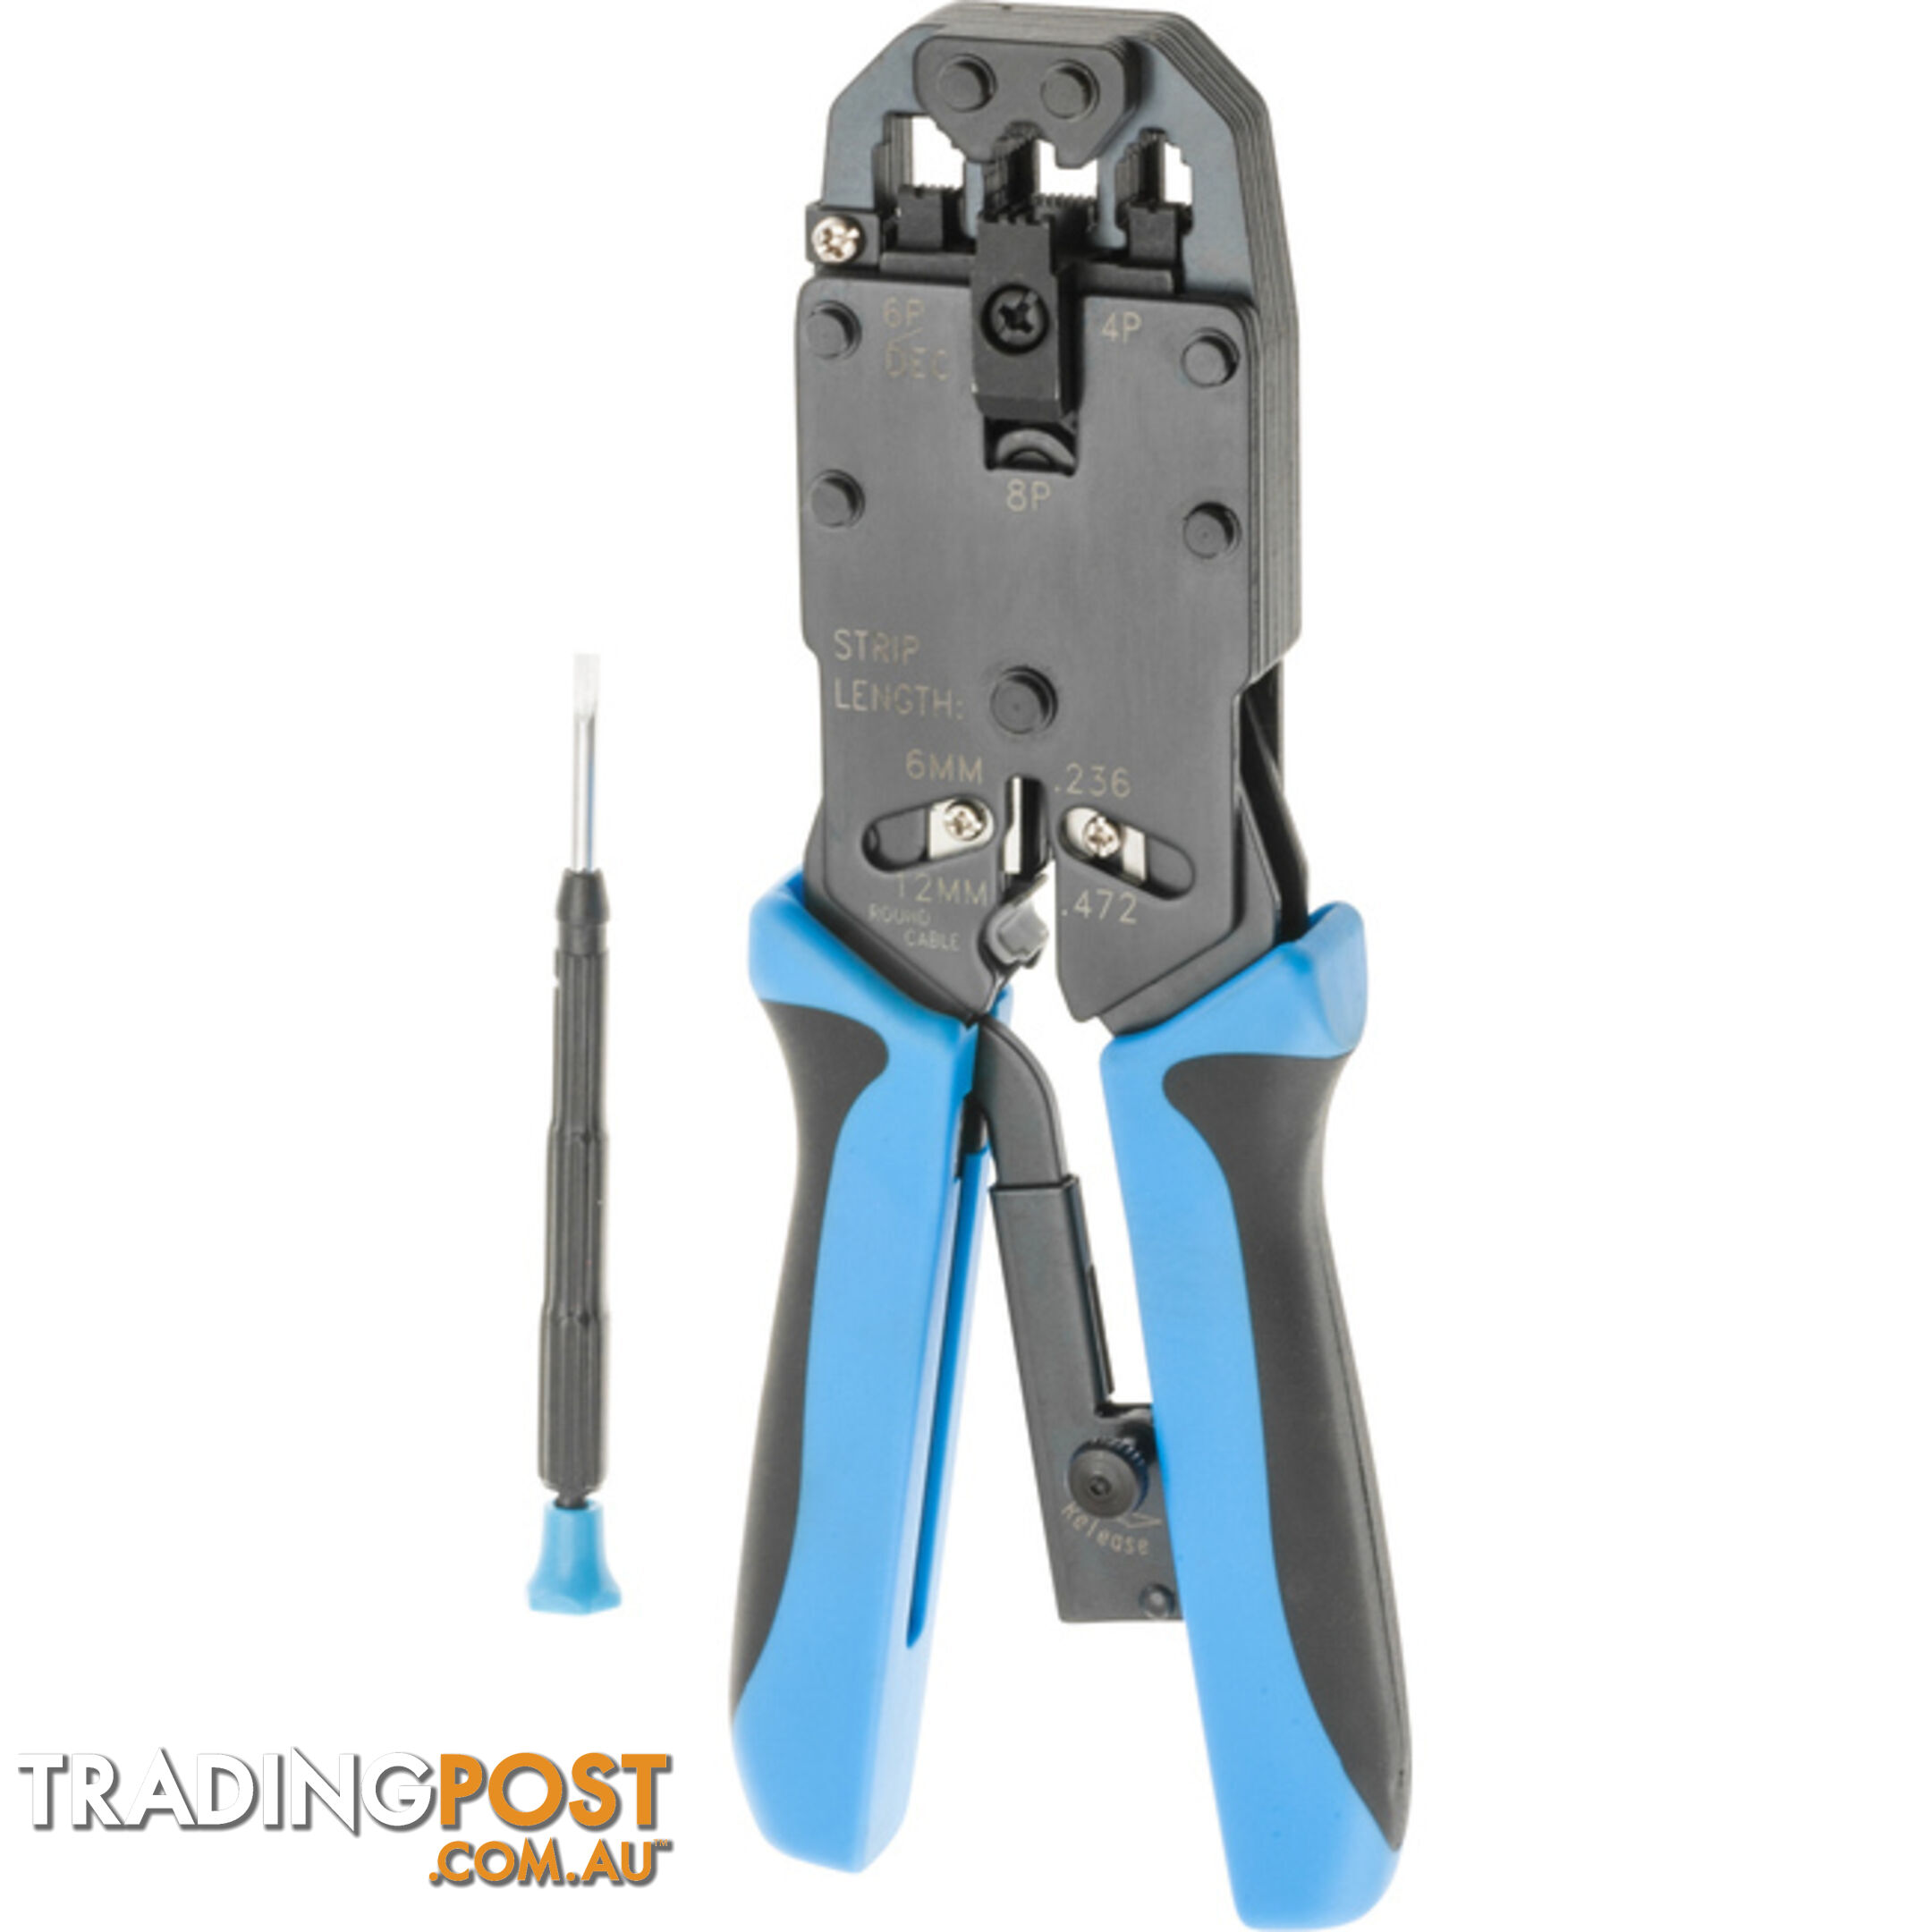 HT2008AR PRO 8.3" MODULAR CRIMPING TOOL WITH RATCHET STRIPPING CUTTING